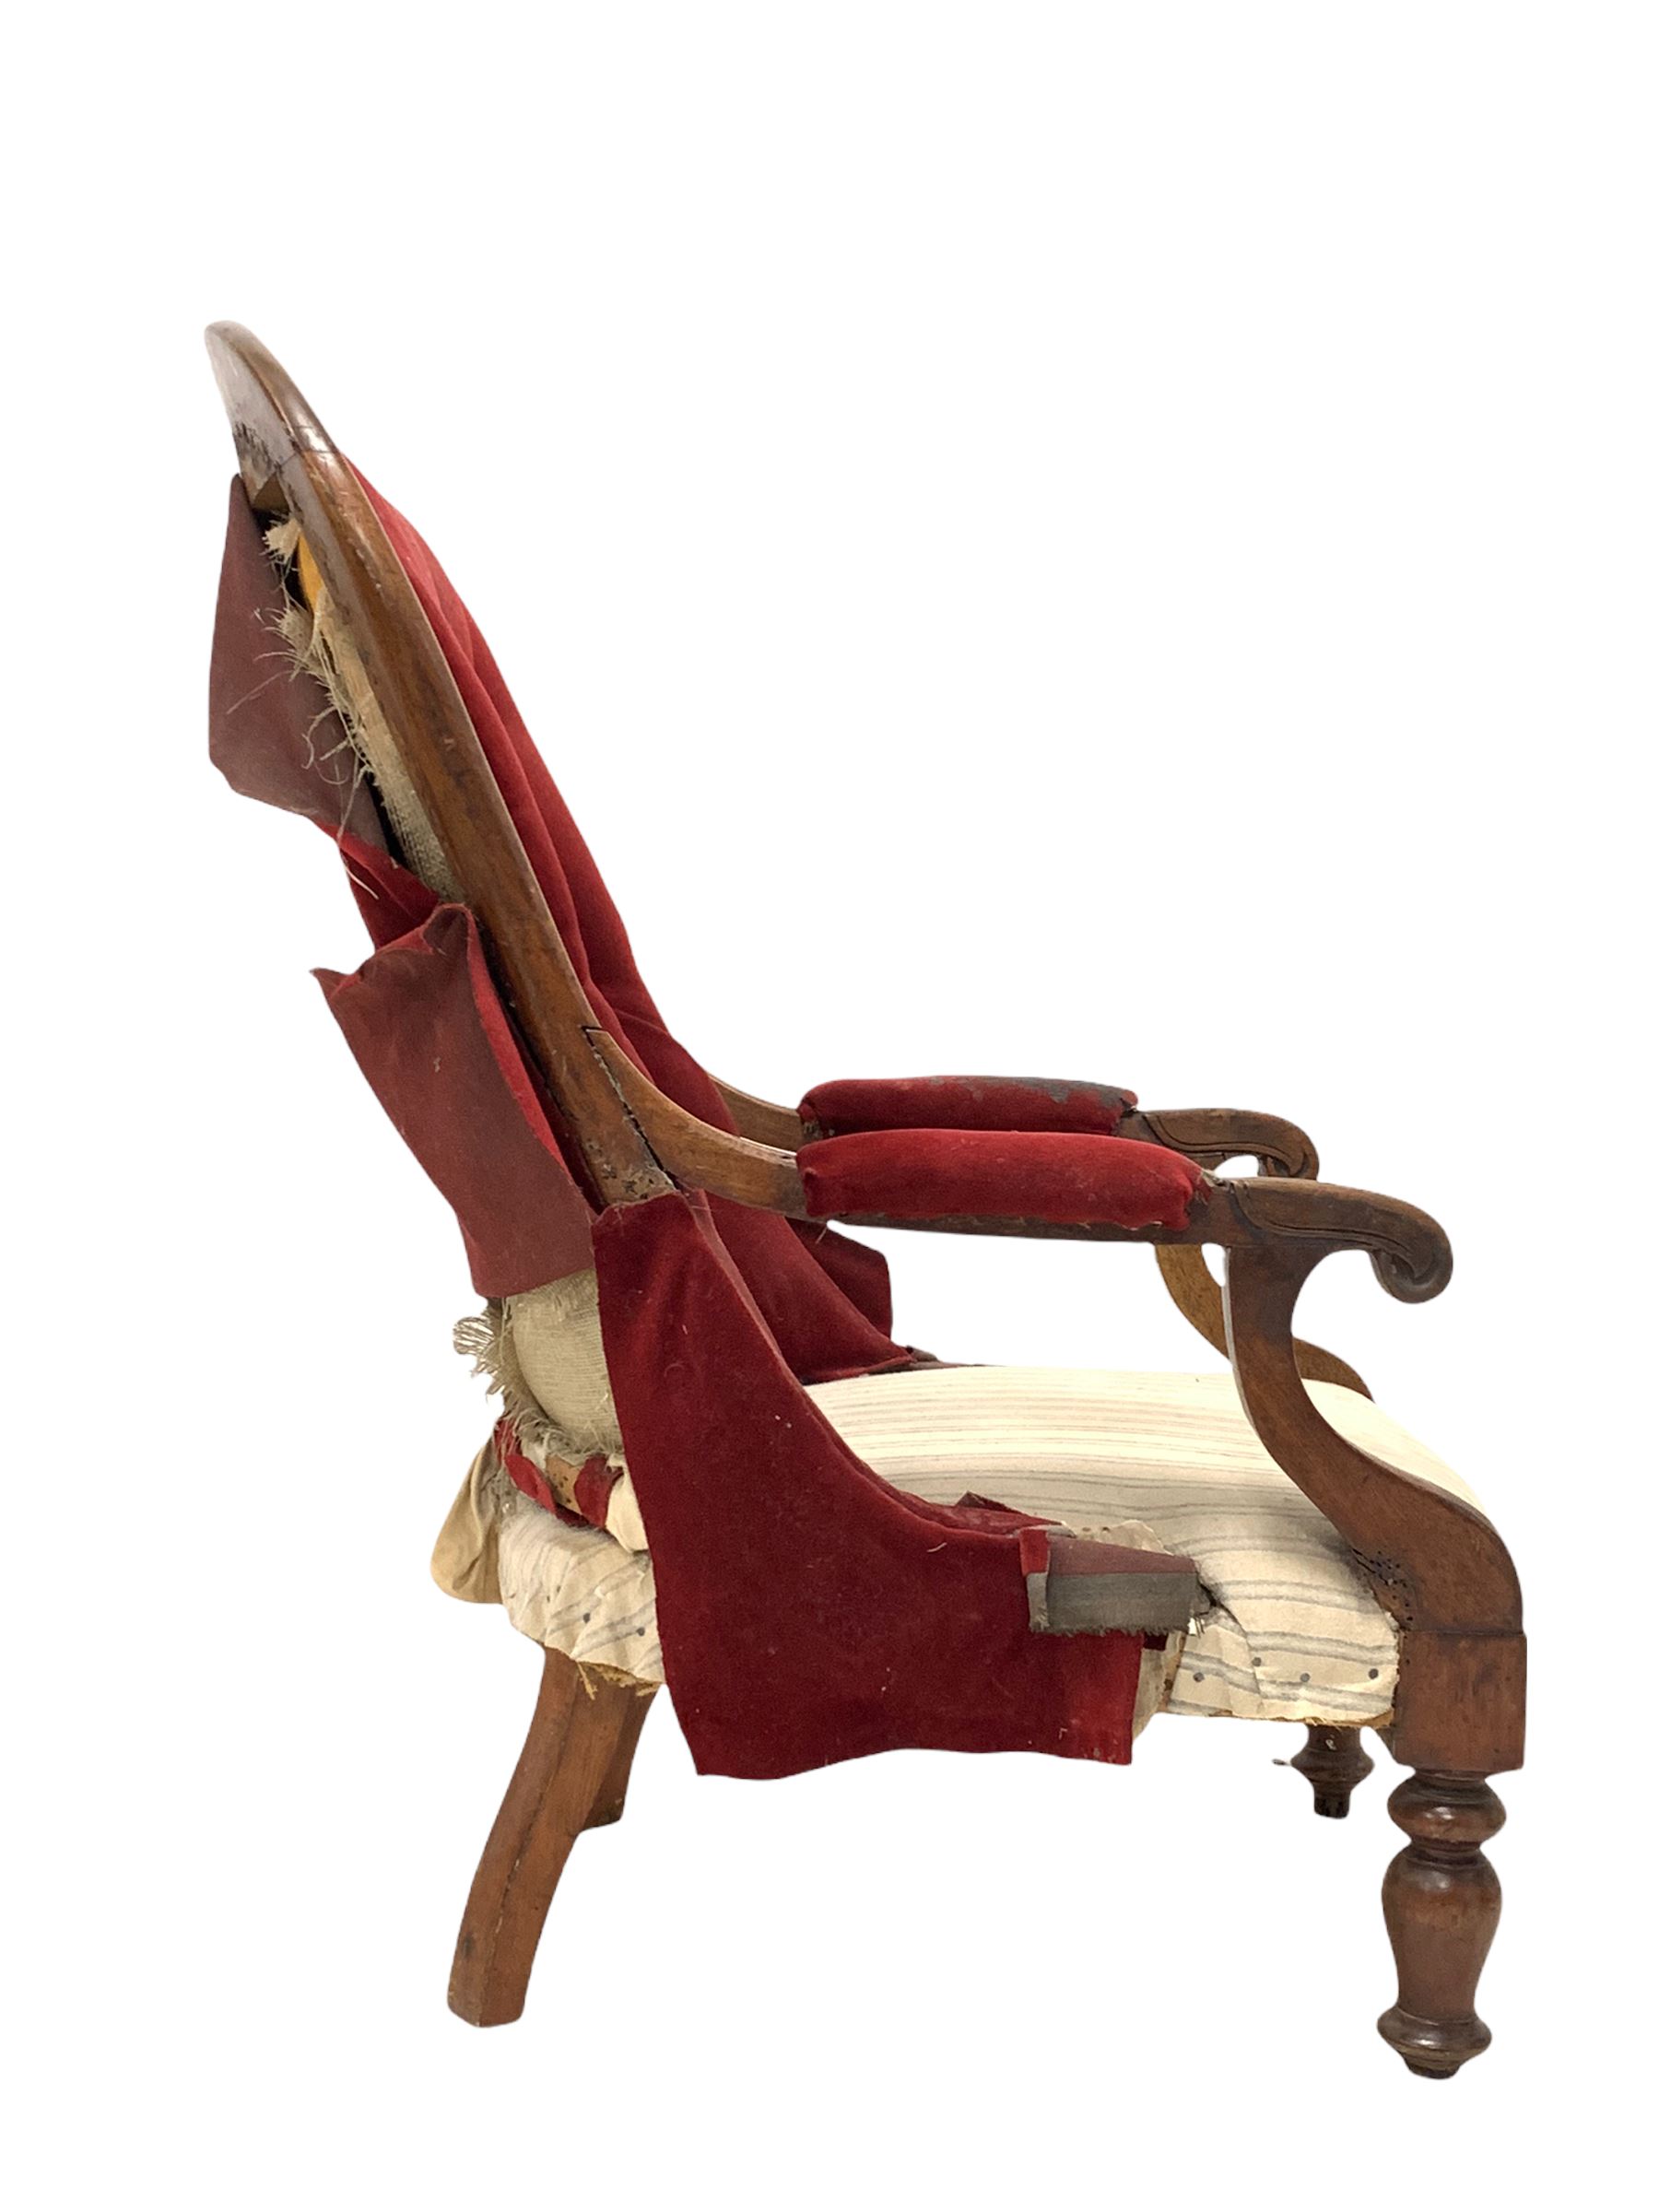 Victorian spoon back armchair - Image 3 of 3